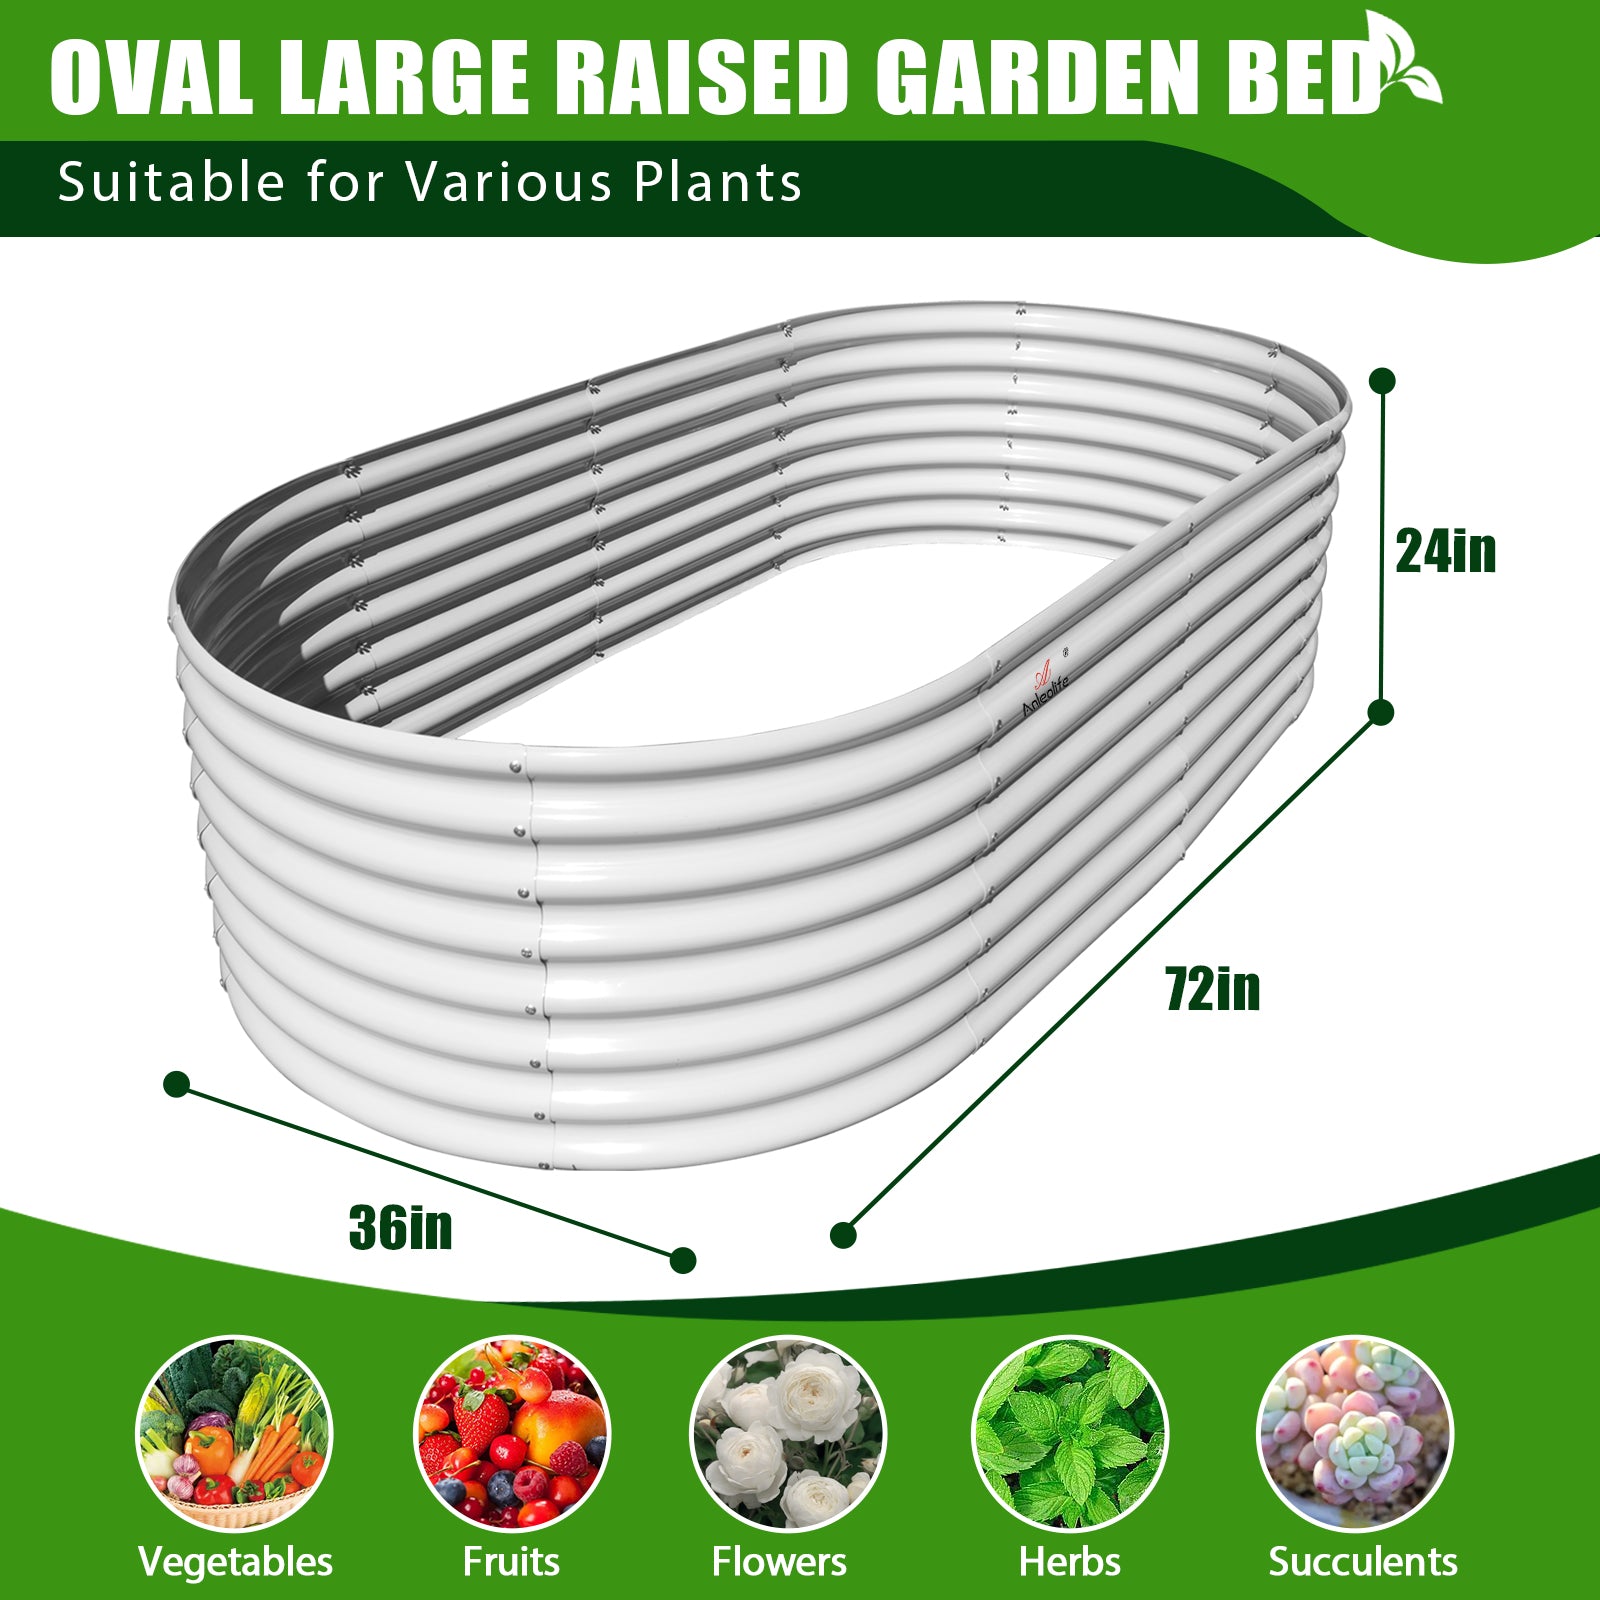 Set of 2: 6x3x2ft Oval Metal Raised Garden Beds (White)